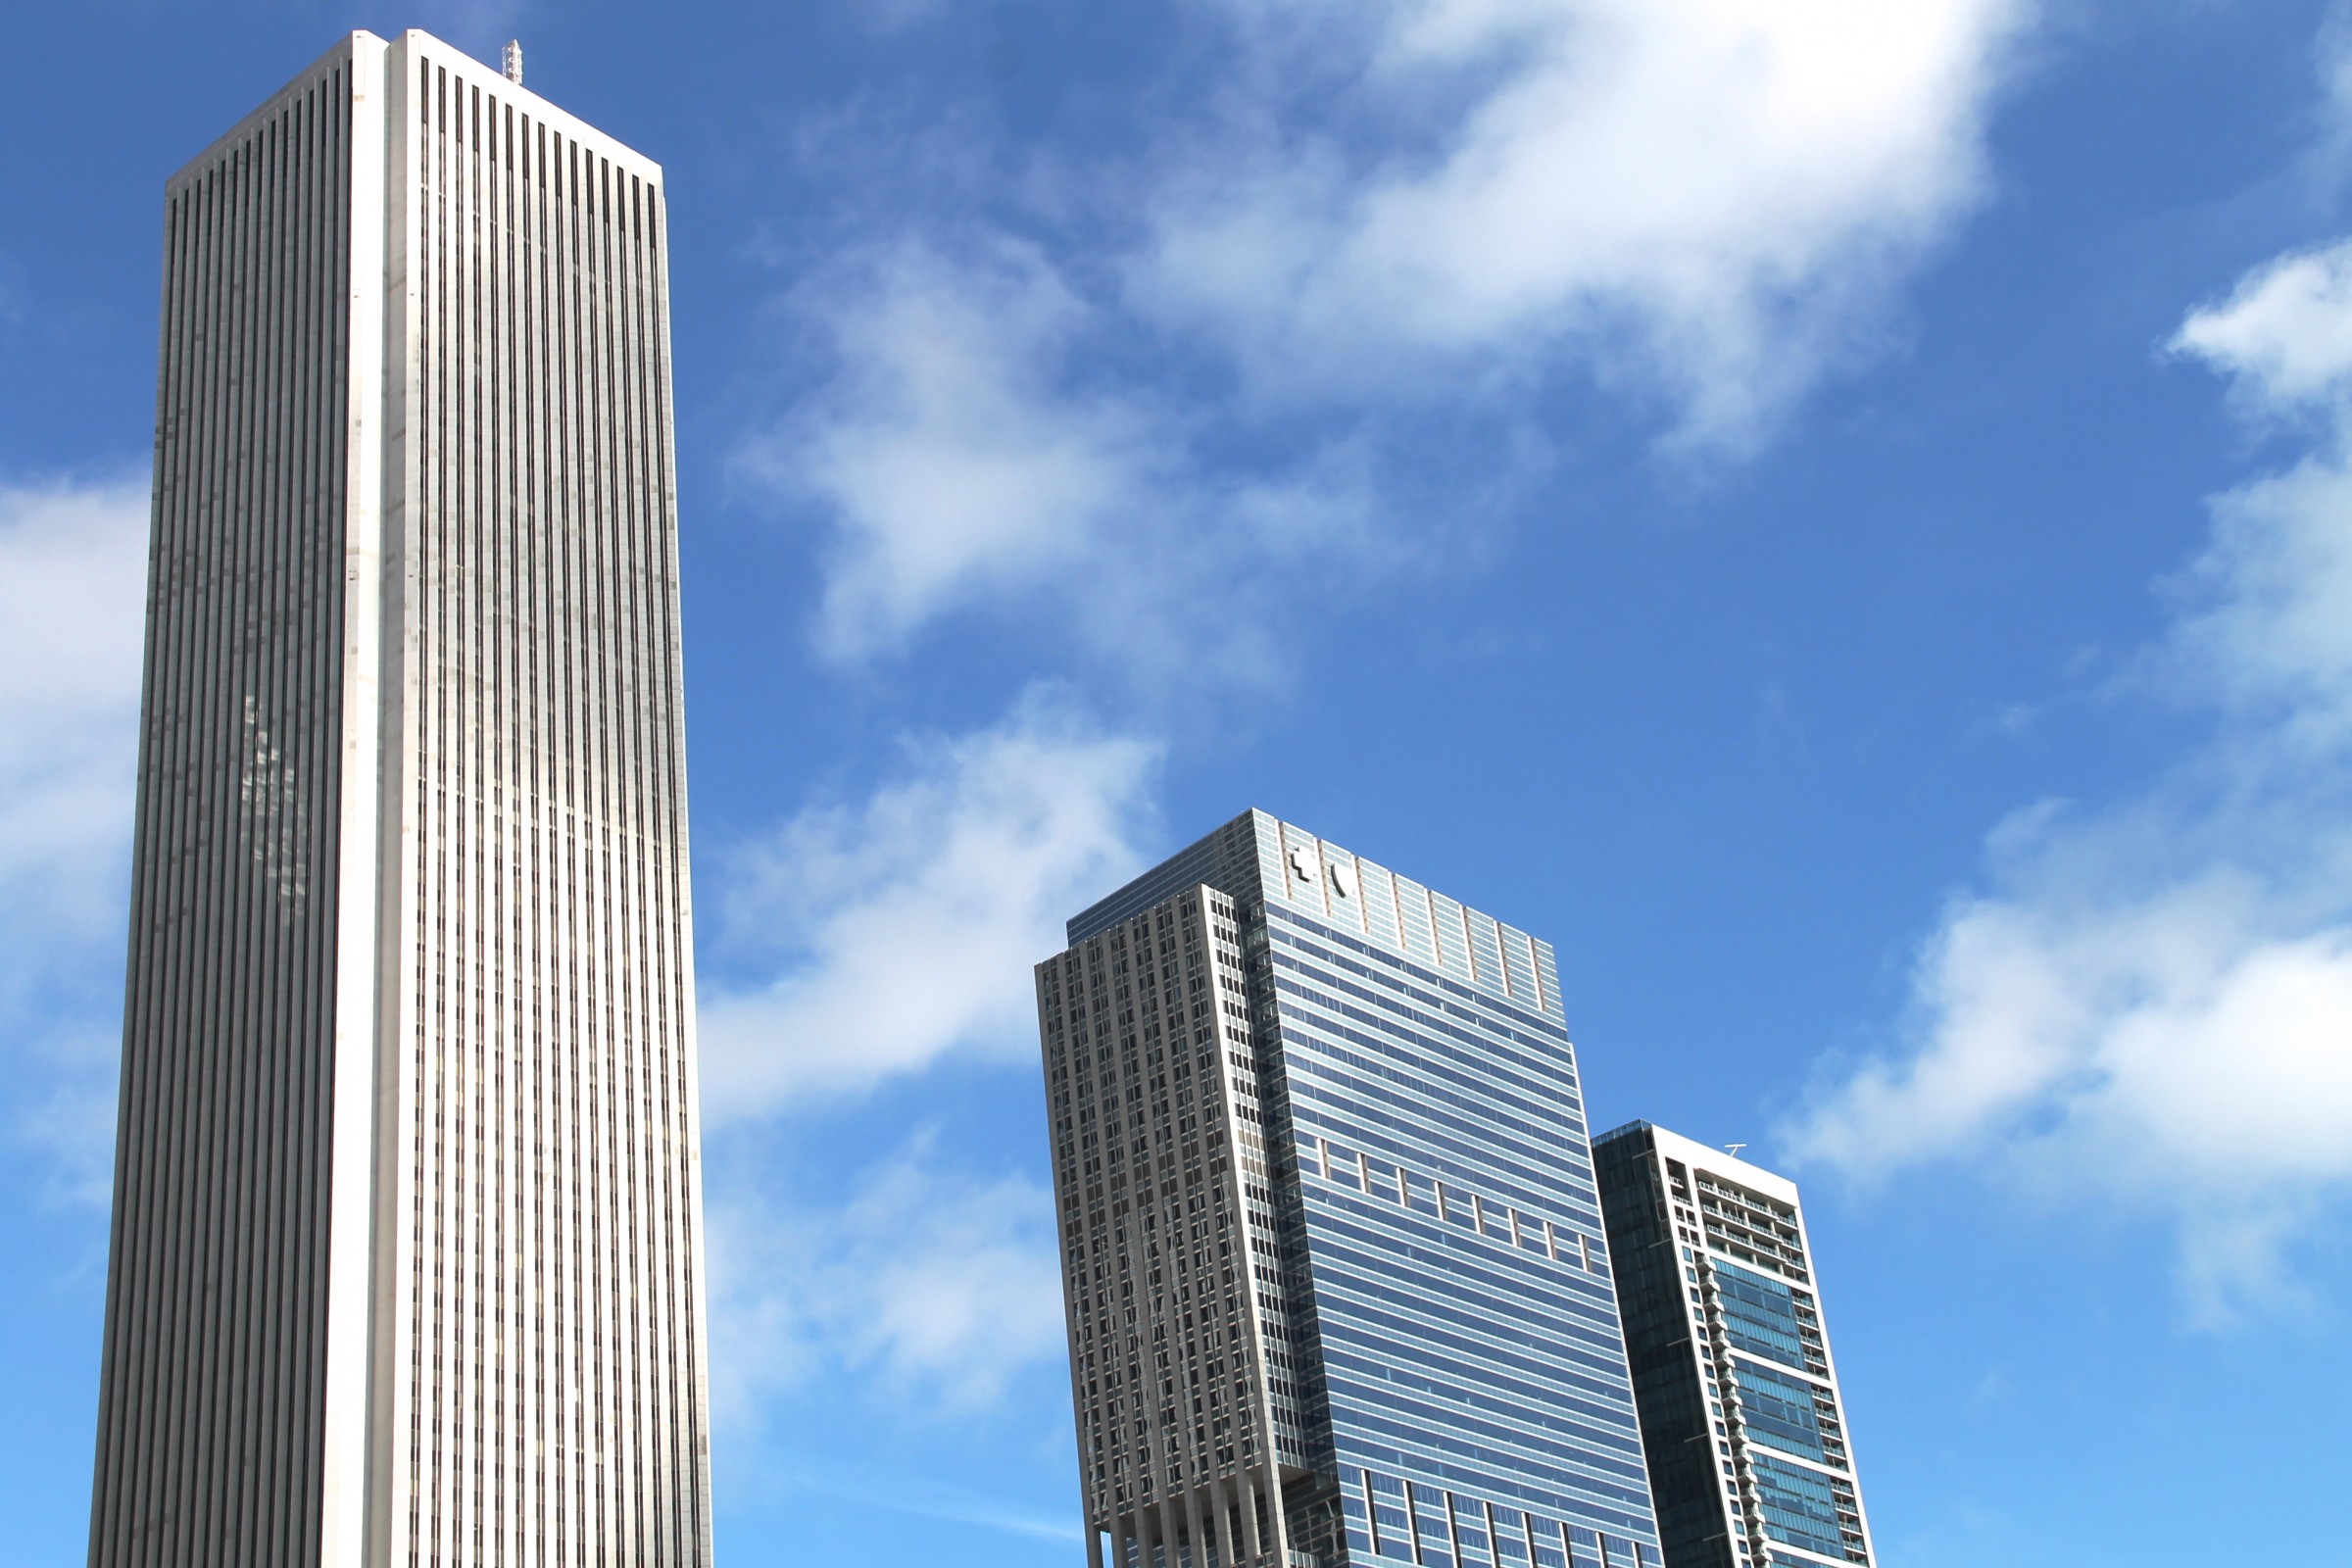 Free Stock Photo of 3 Tall Buildings in Sky with Clouds